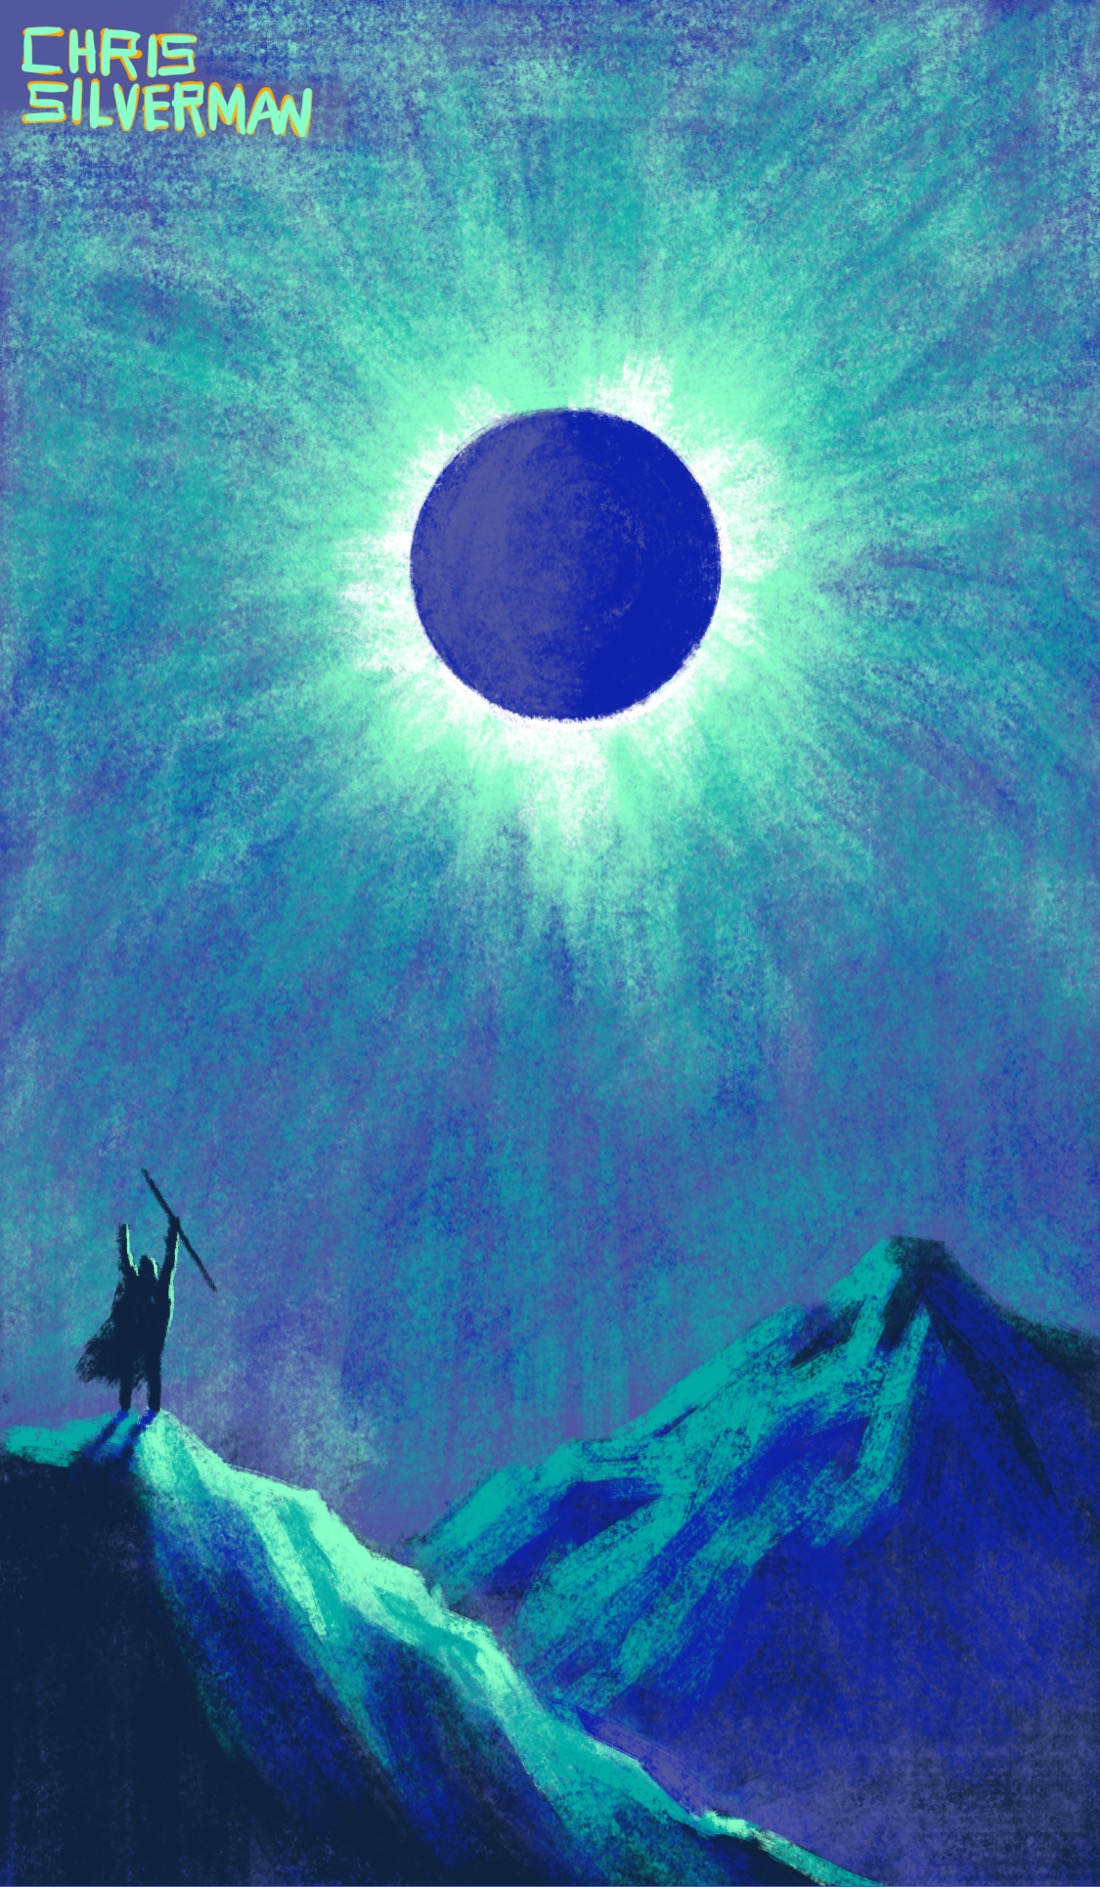 A full solar eclipse. The sun hangs in an eerie, purple sky, fully obscured, only a green and white corona visible. Below are several craggy mountains, also illuminated with a weird green light. On top of the closer mountain stands a small figure wearing a cloak, both arms raised to the sky, a staff clutched in the right arm. The figure appears to be staring directly at the sun without eclipse glasses, which one should never do, even if one is a sorcerer summoning the apocalypse.